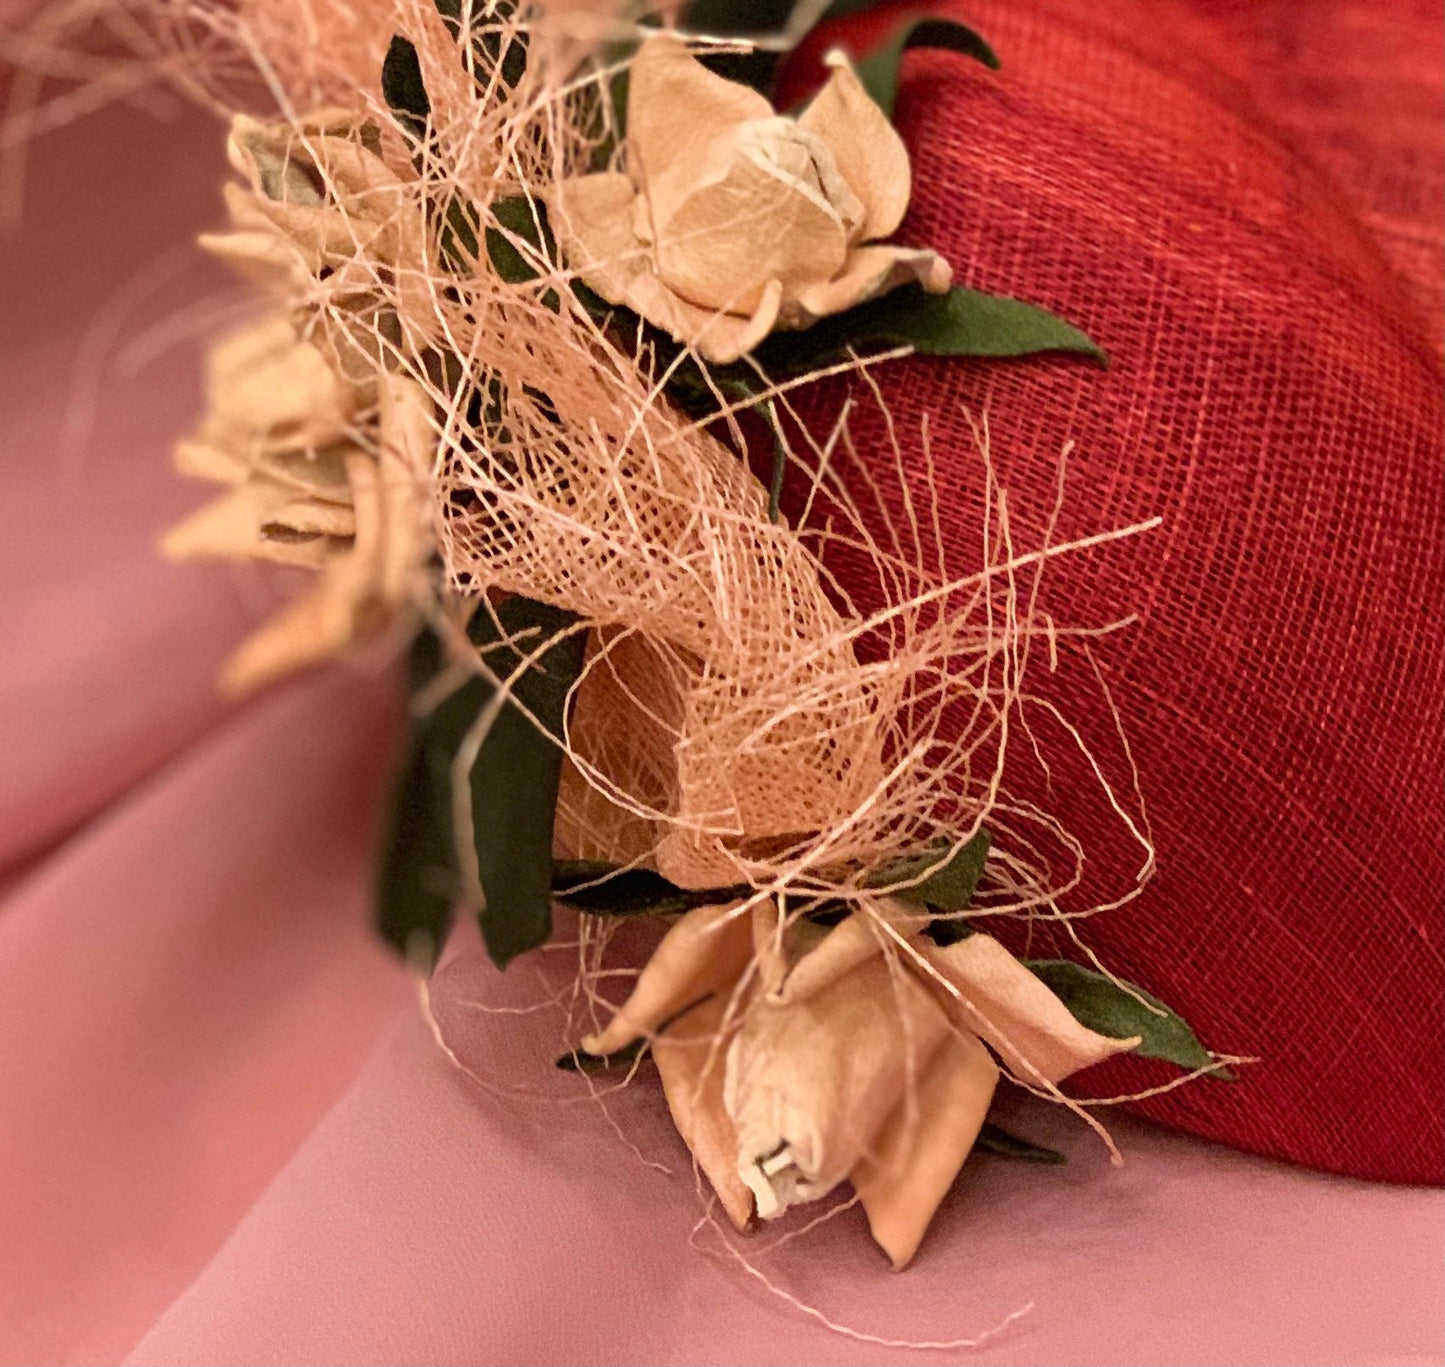 Valentine’s Day One-Of-A-Kind, Just like you! Charming Fascinator to bring out your love and romance! Feminine-Classic-Custom Design!